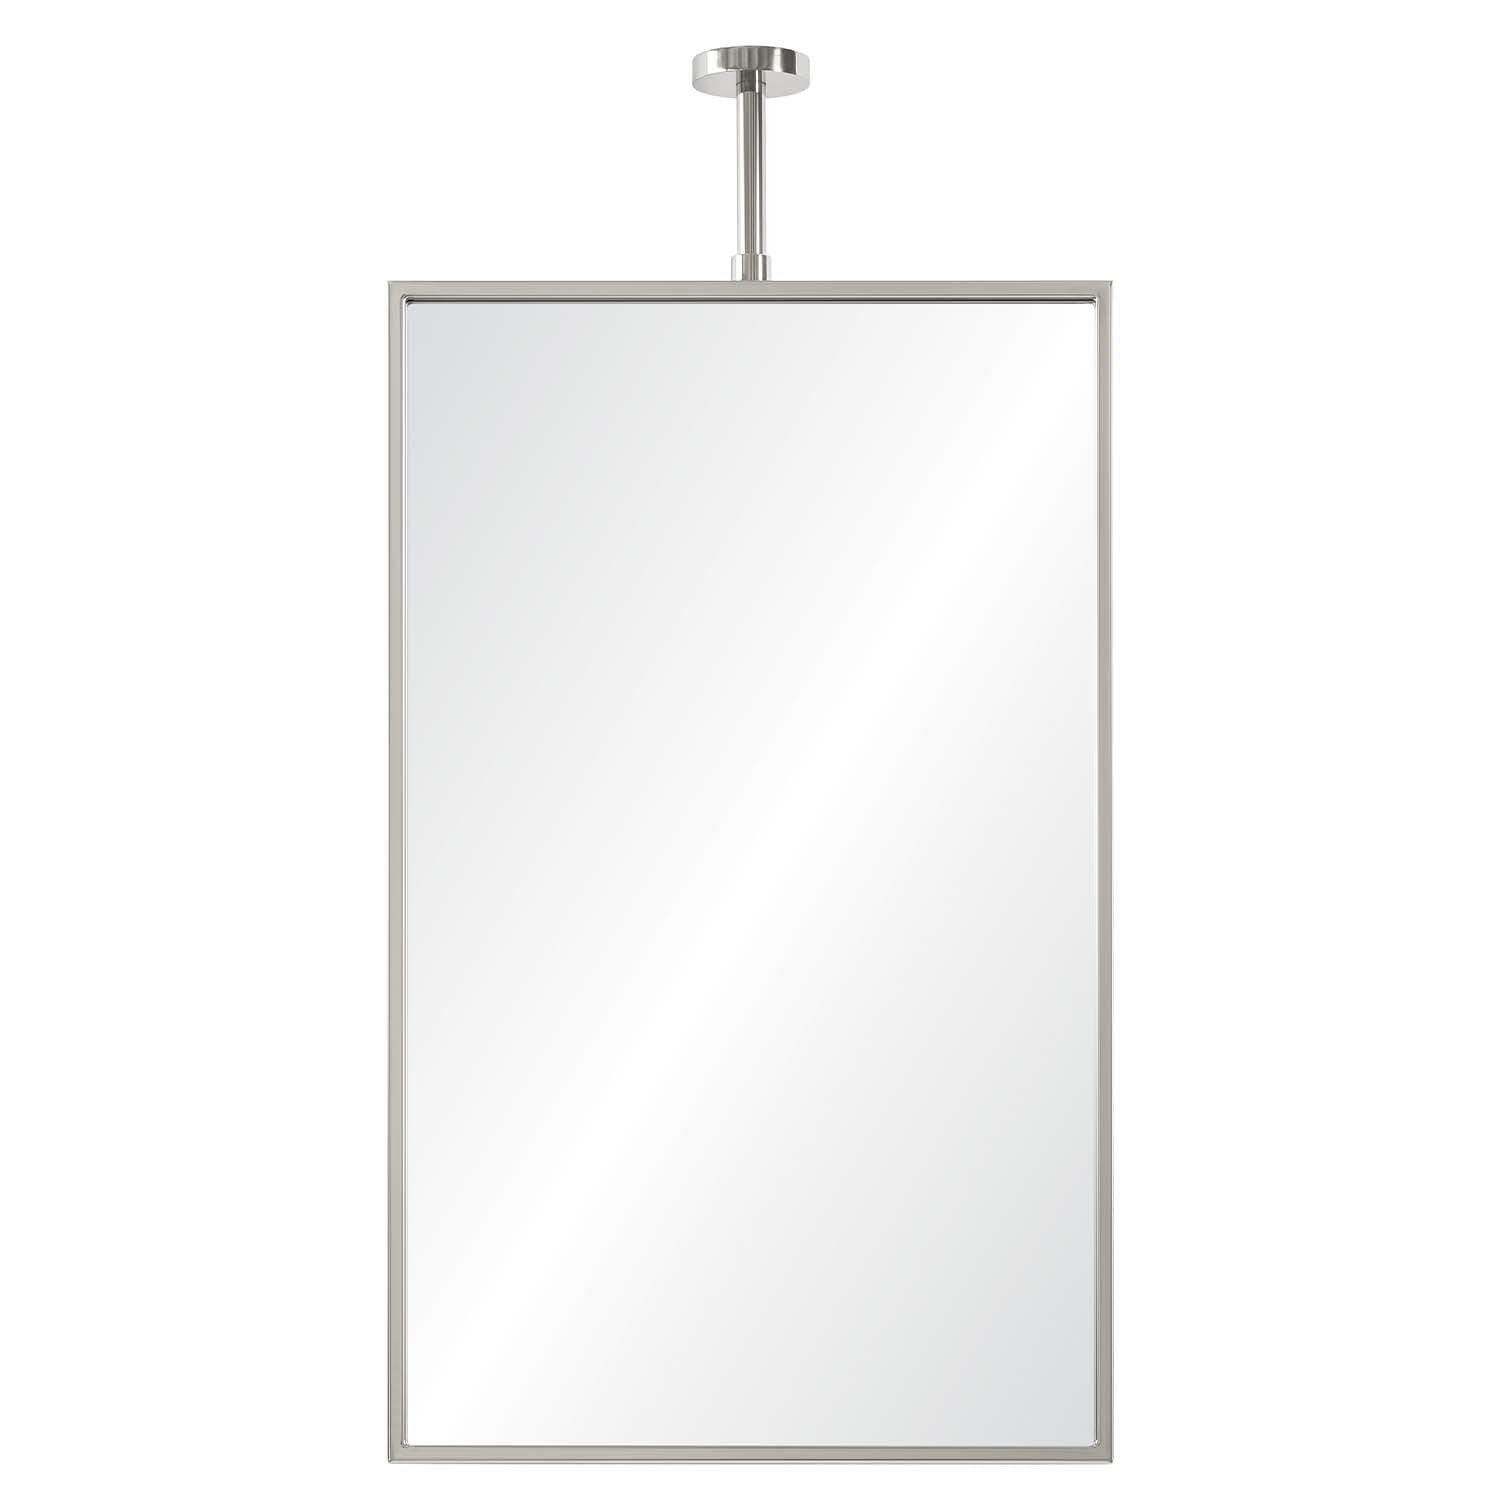 mirror home ceiling mount mirror polished stainless steel